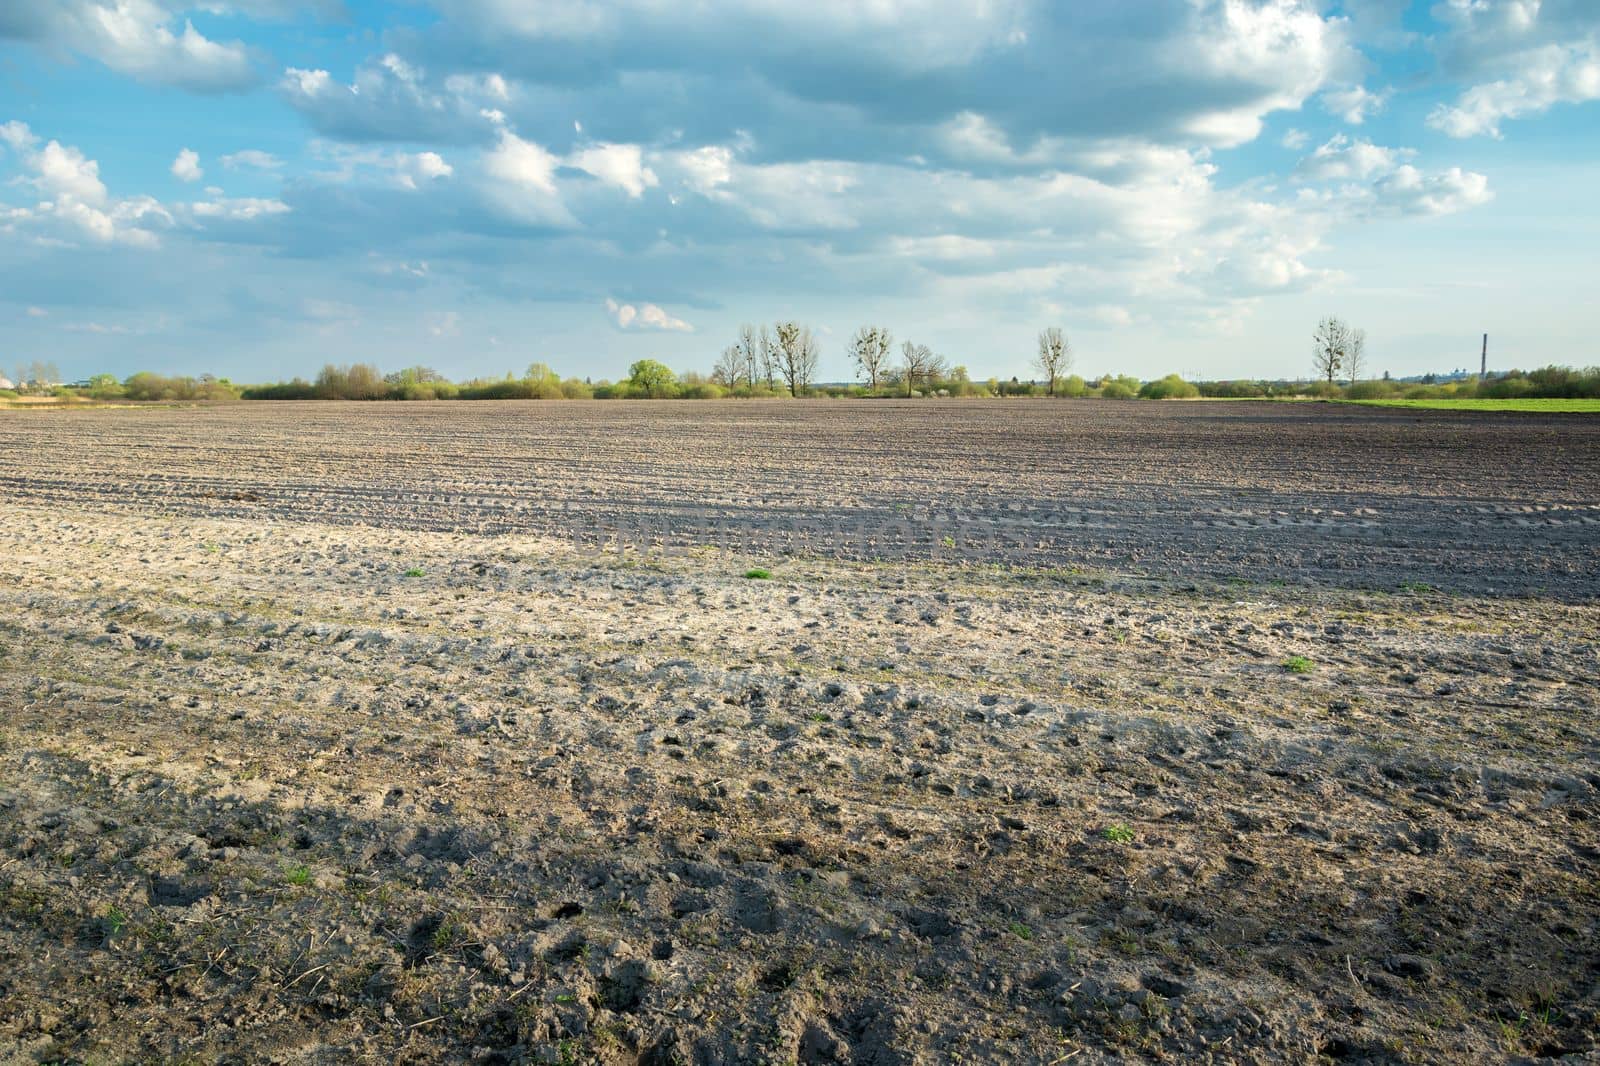 Wild animal tracks in a plowed field, spring view in eastern Poland